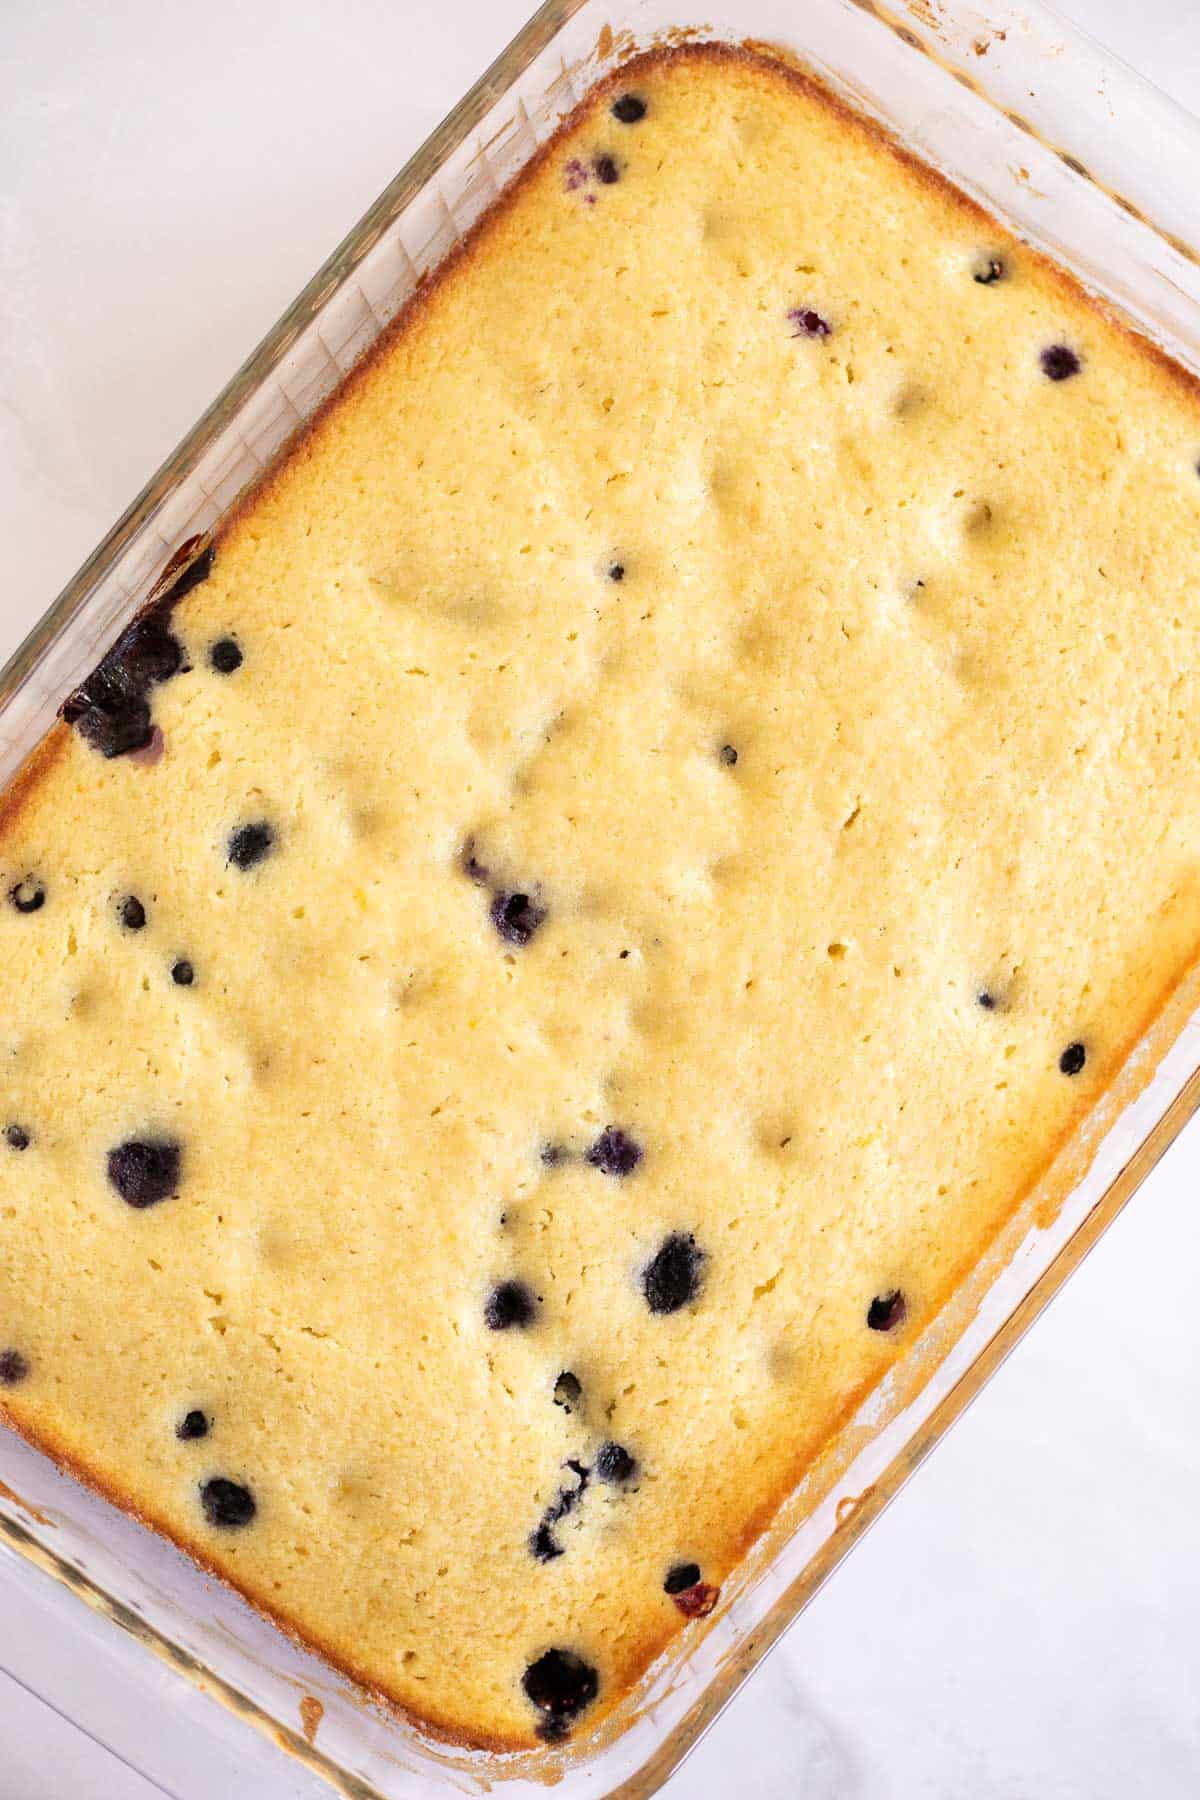 baked lemon blueberry sheet cake without frosting in a glass baking dish.